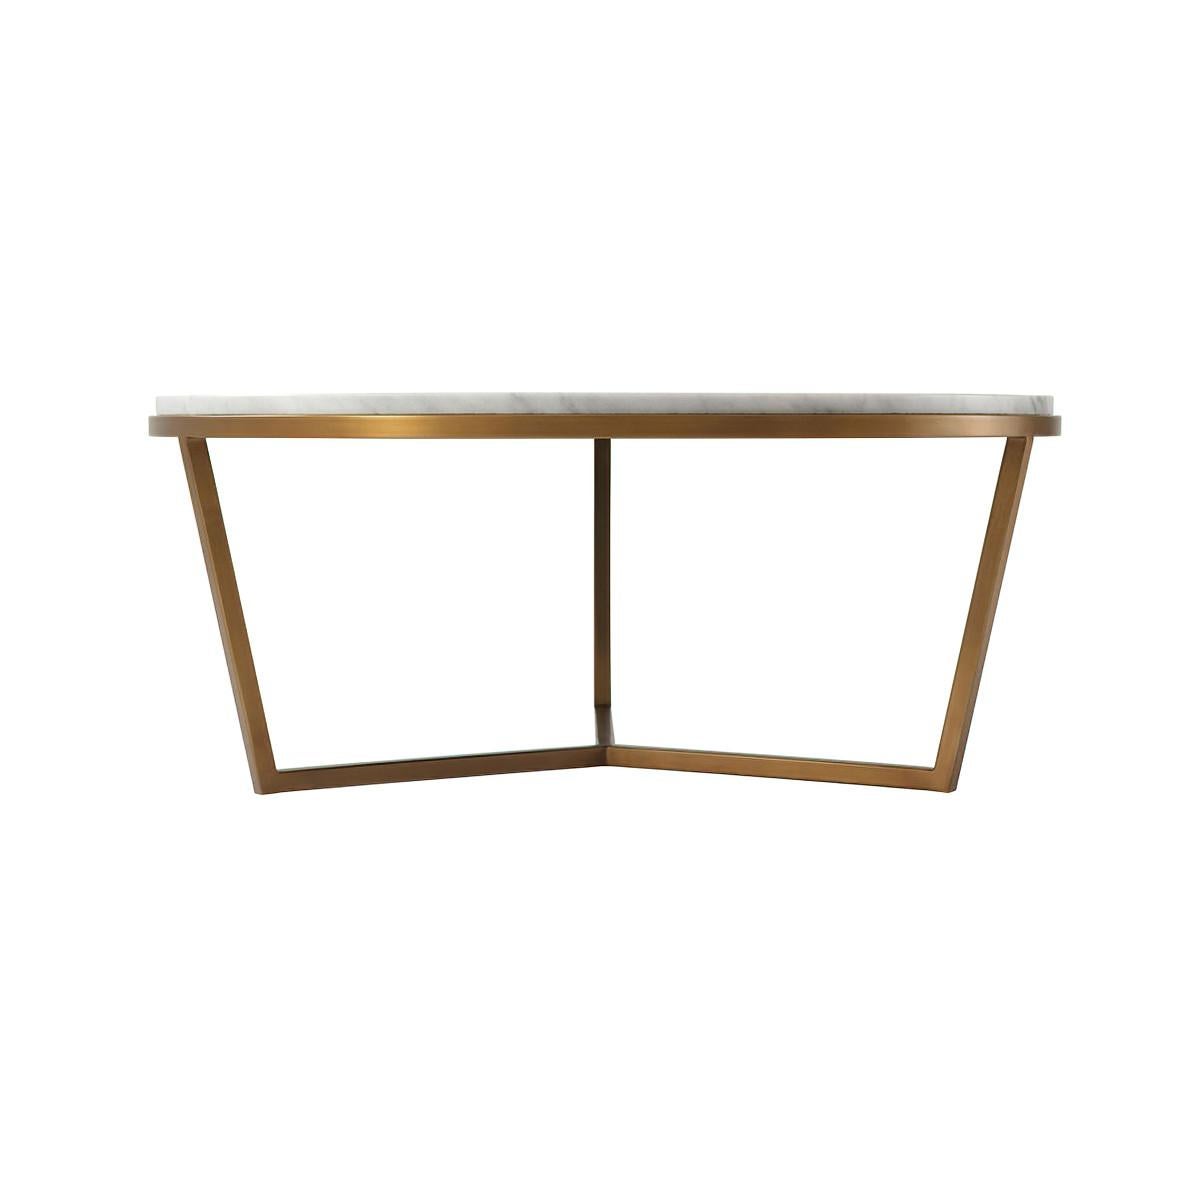 A small modern marble top cocktail table with a stepped edge. The circular Bianco Carrara marble top sits on a brushed brass finish base. 

Dimensions: 35.5